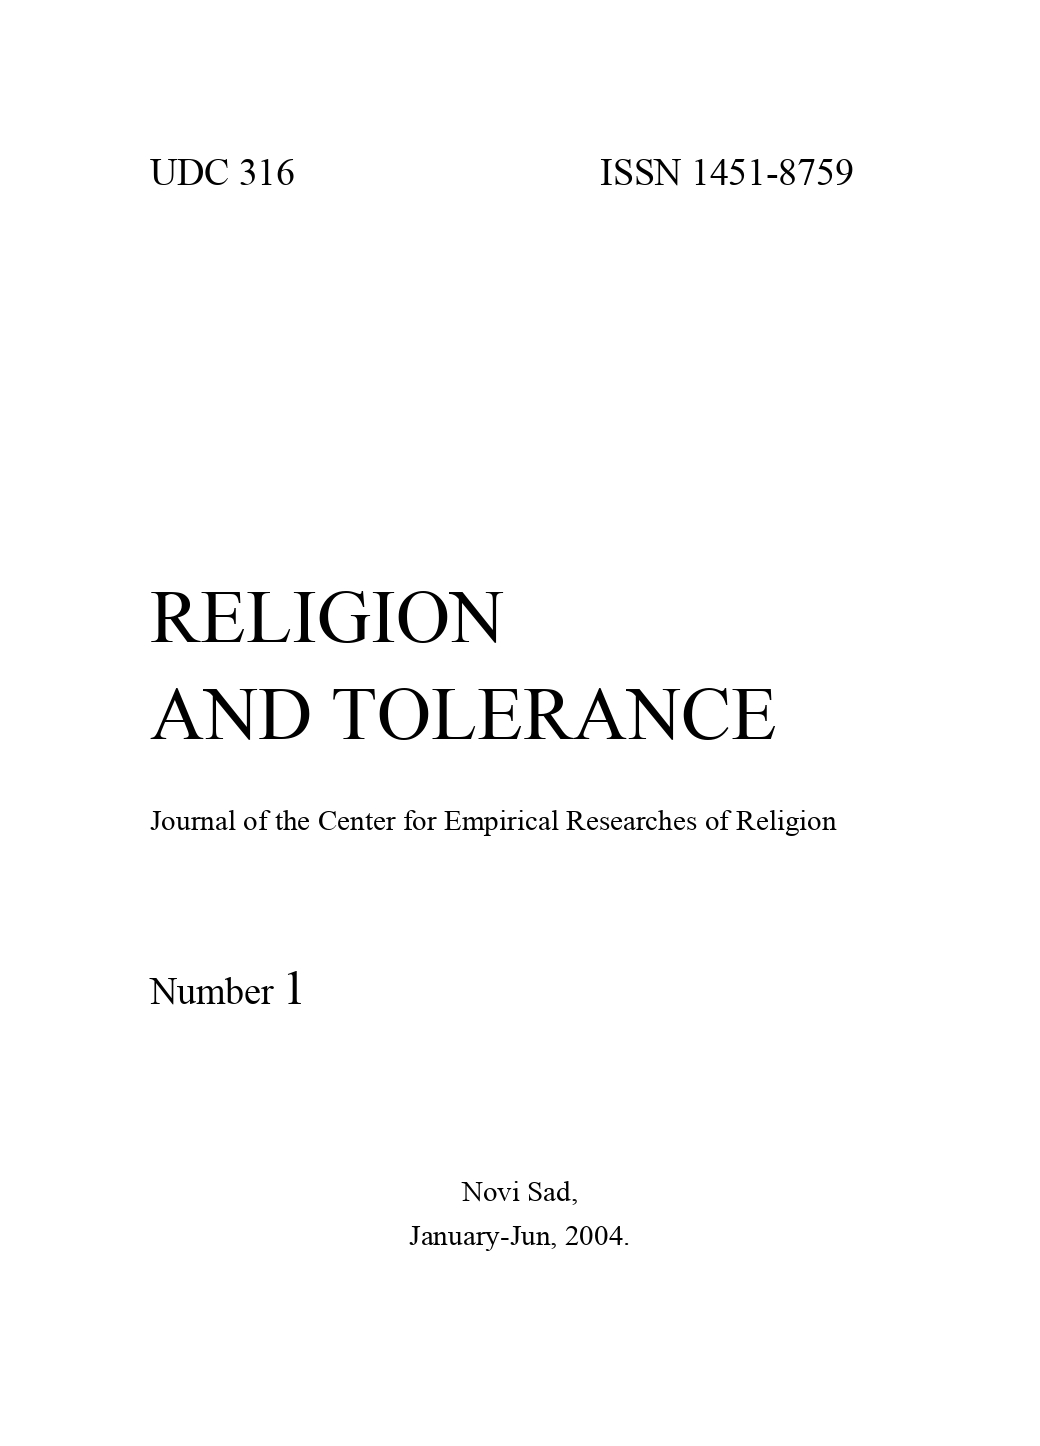 RUSSIAN RELIGIOUS RENAISSANCE AT THE END OF THE TWENTIETH CENTURY. LEGAL ASPECTS, NUMBER AND ACTIVITIES OF RELIGIOUS COMMUNITIES Cover Image